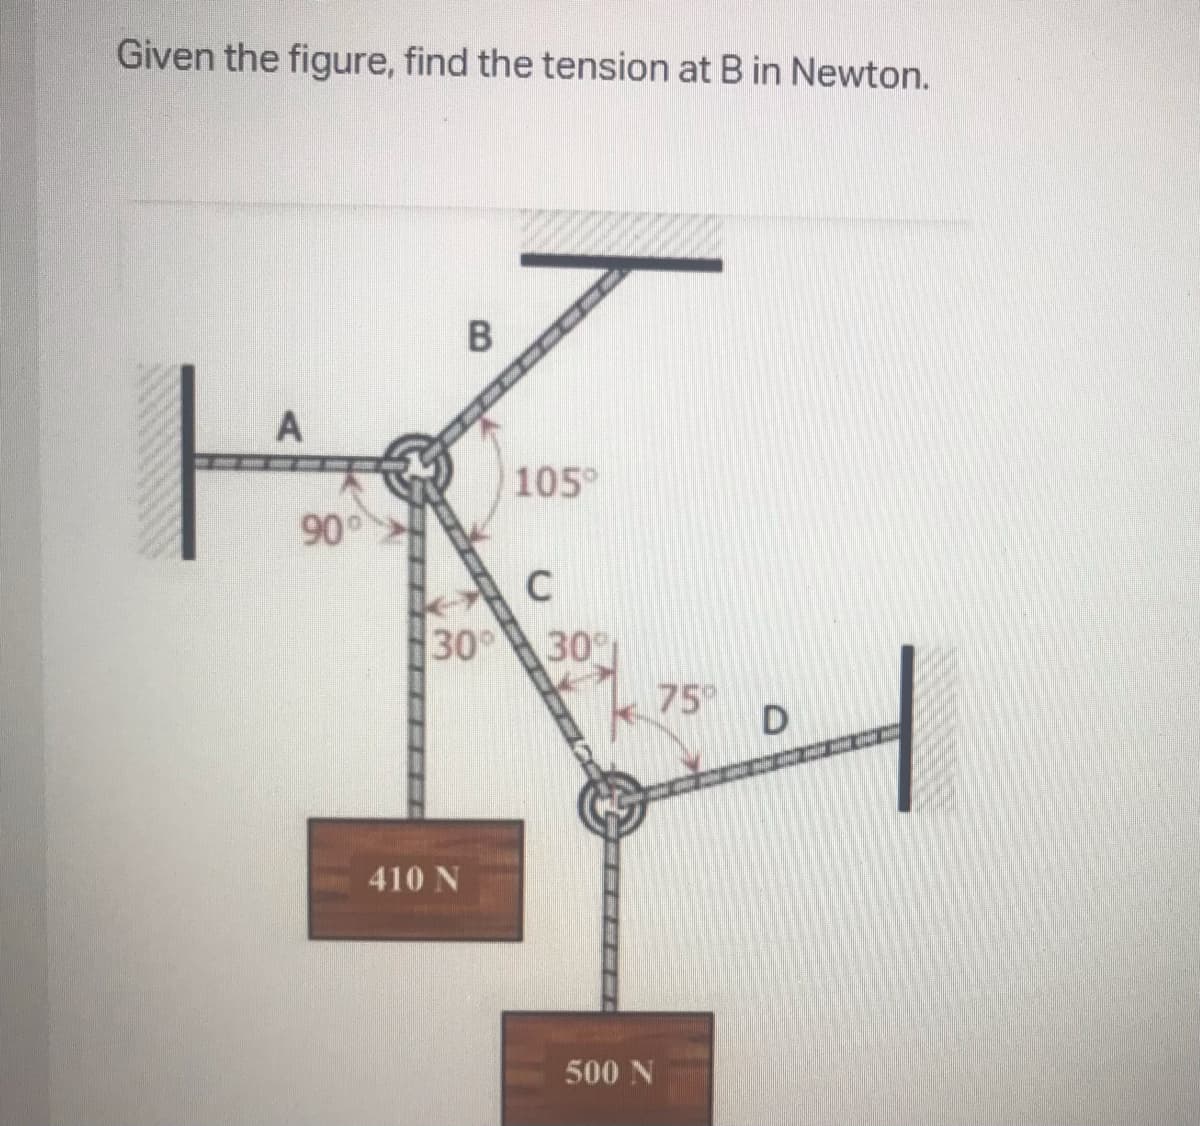 Given the figure, find the tension at B in Newton.
B
A
105°
90
C
30°
30
75
D
410 N
500 N
